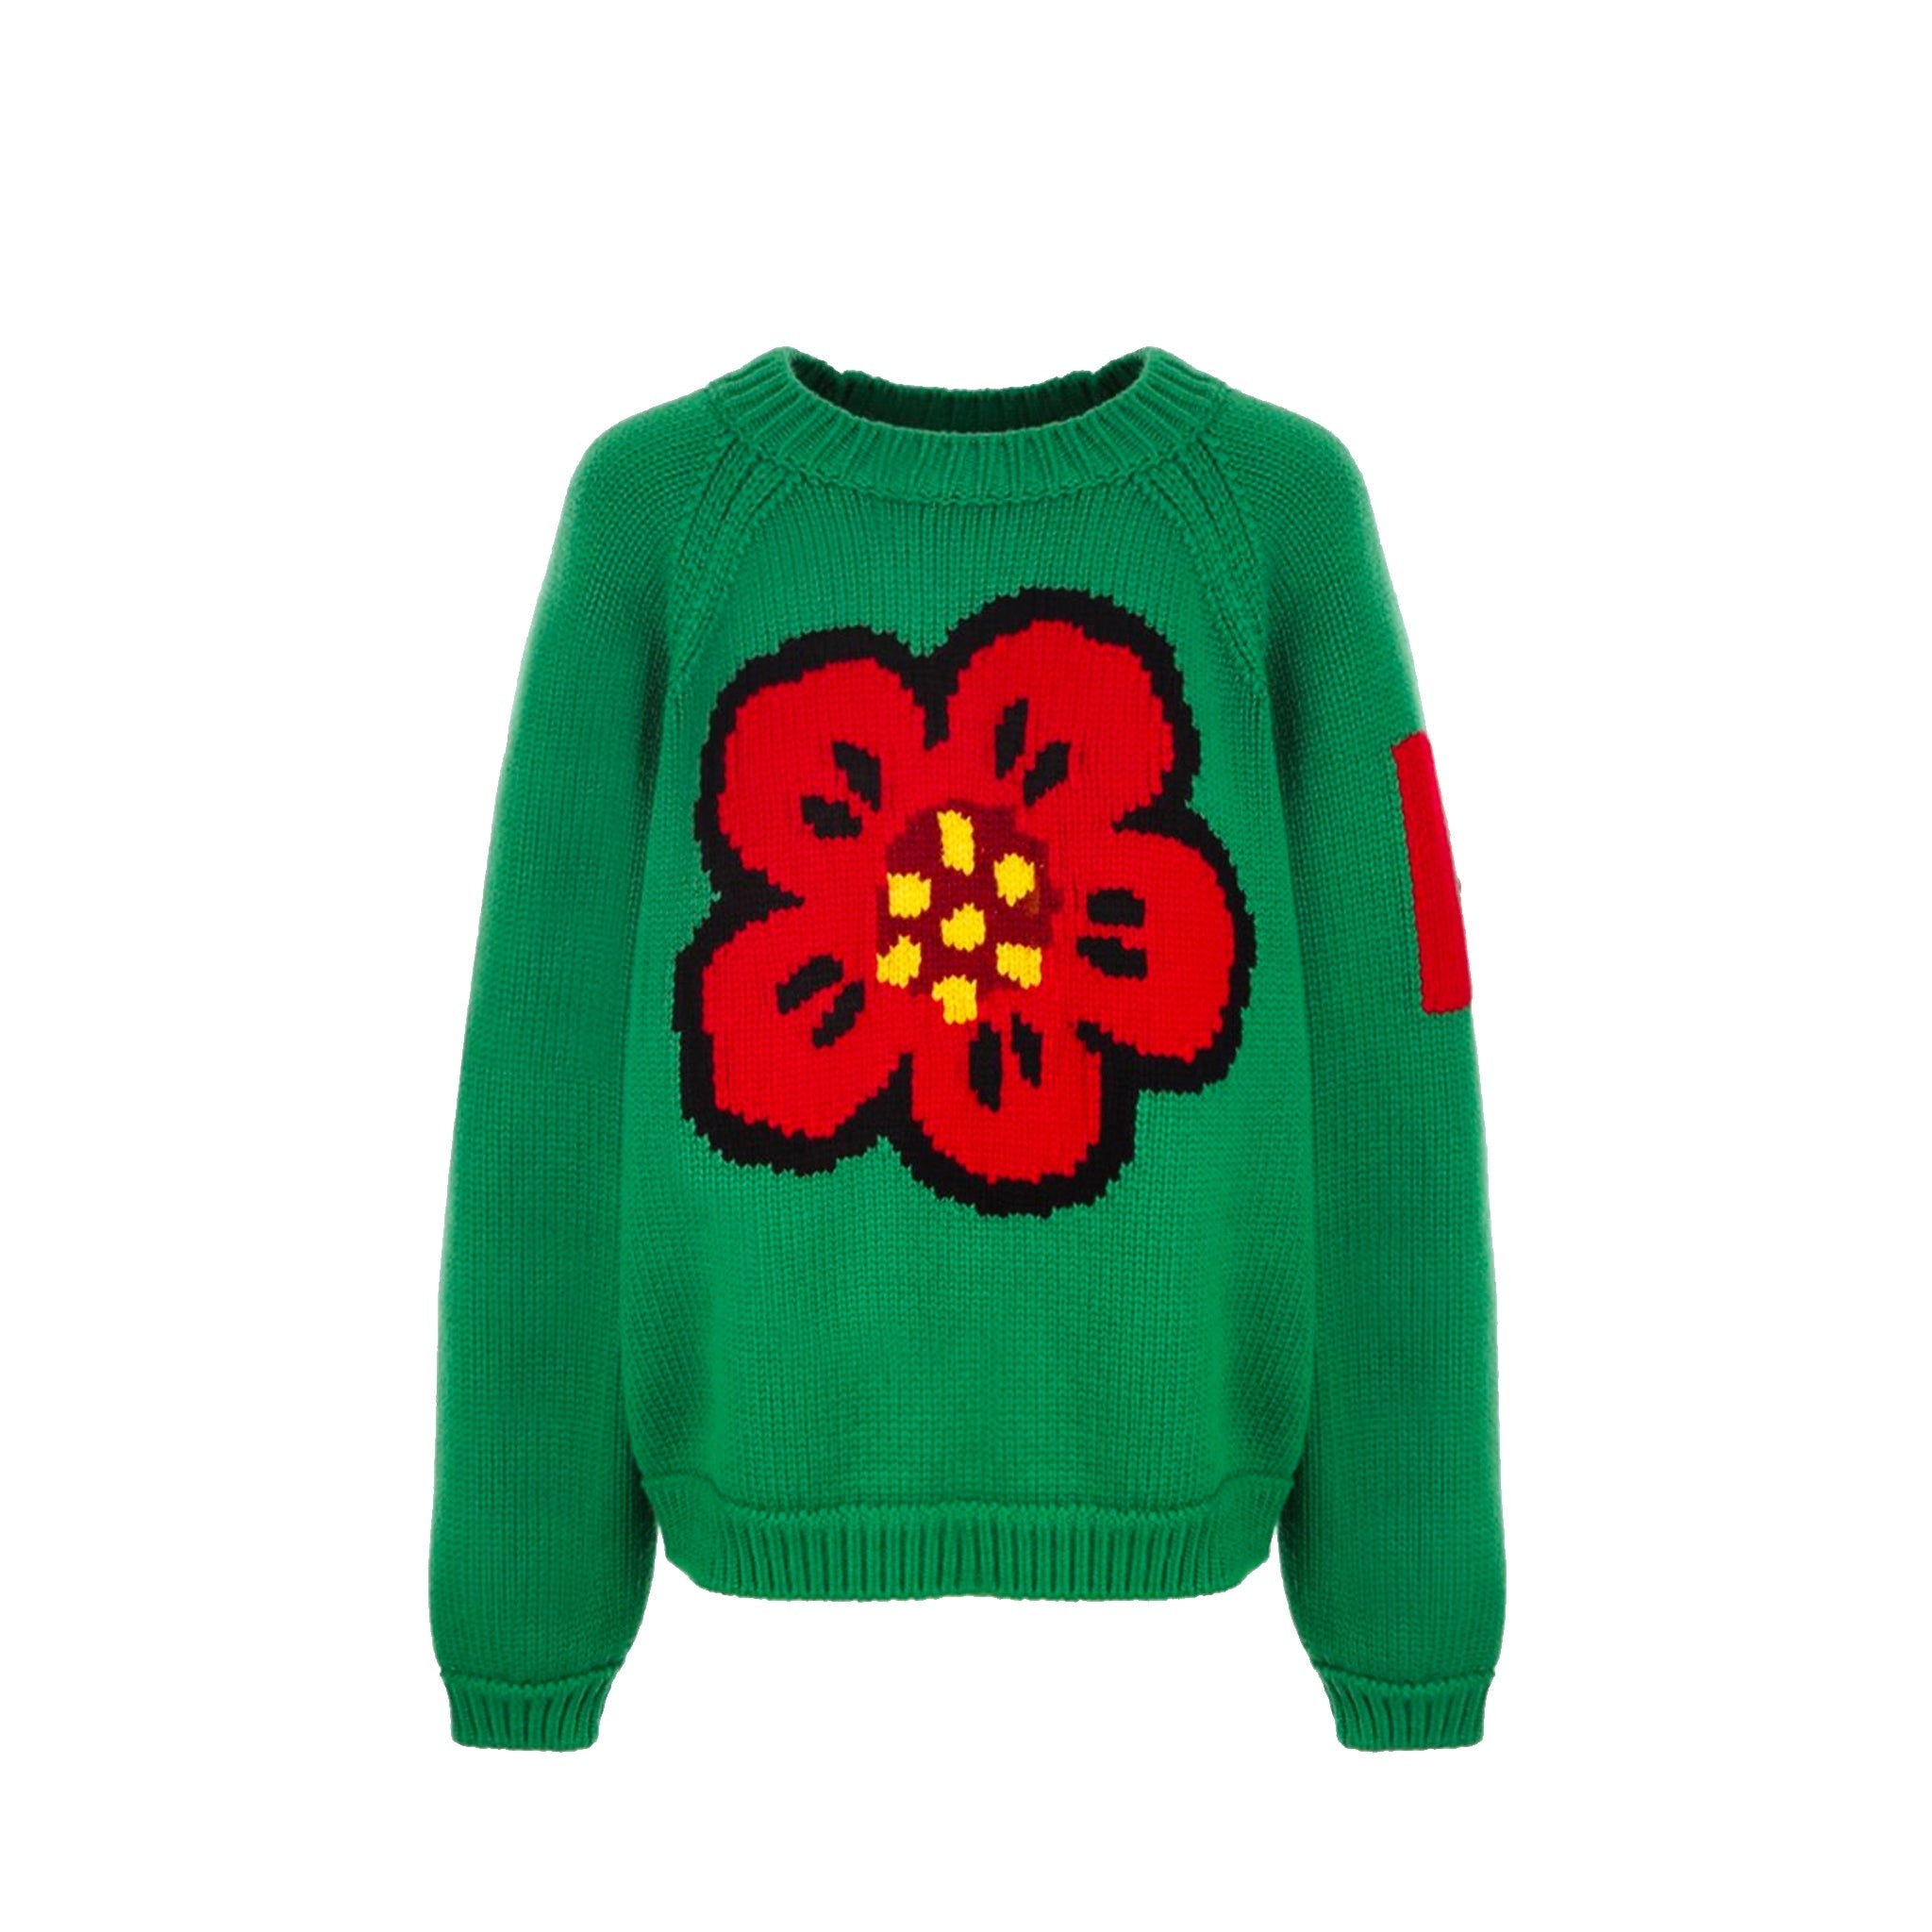 KENZO-OUTLET-SALE-Kenzo-Cotton-Sweater-Strick-GREEN-M-ARCHIVE-COLLECTION.jpg